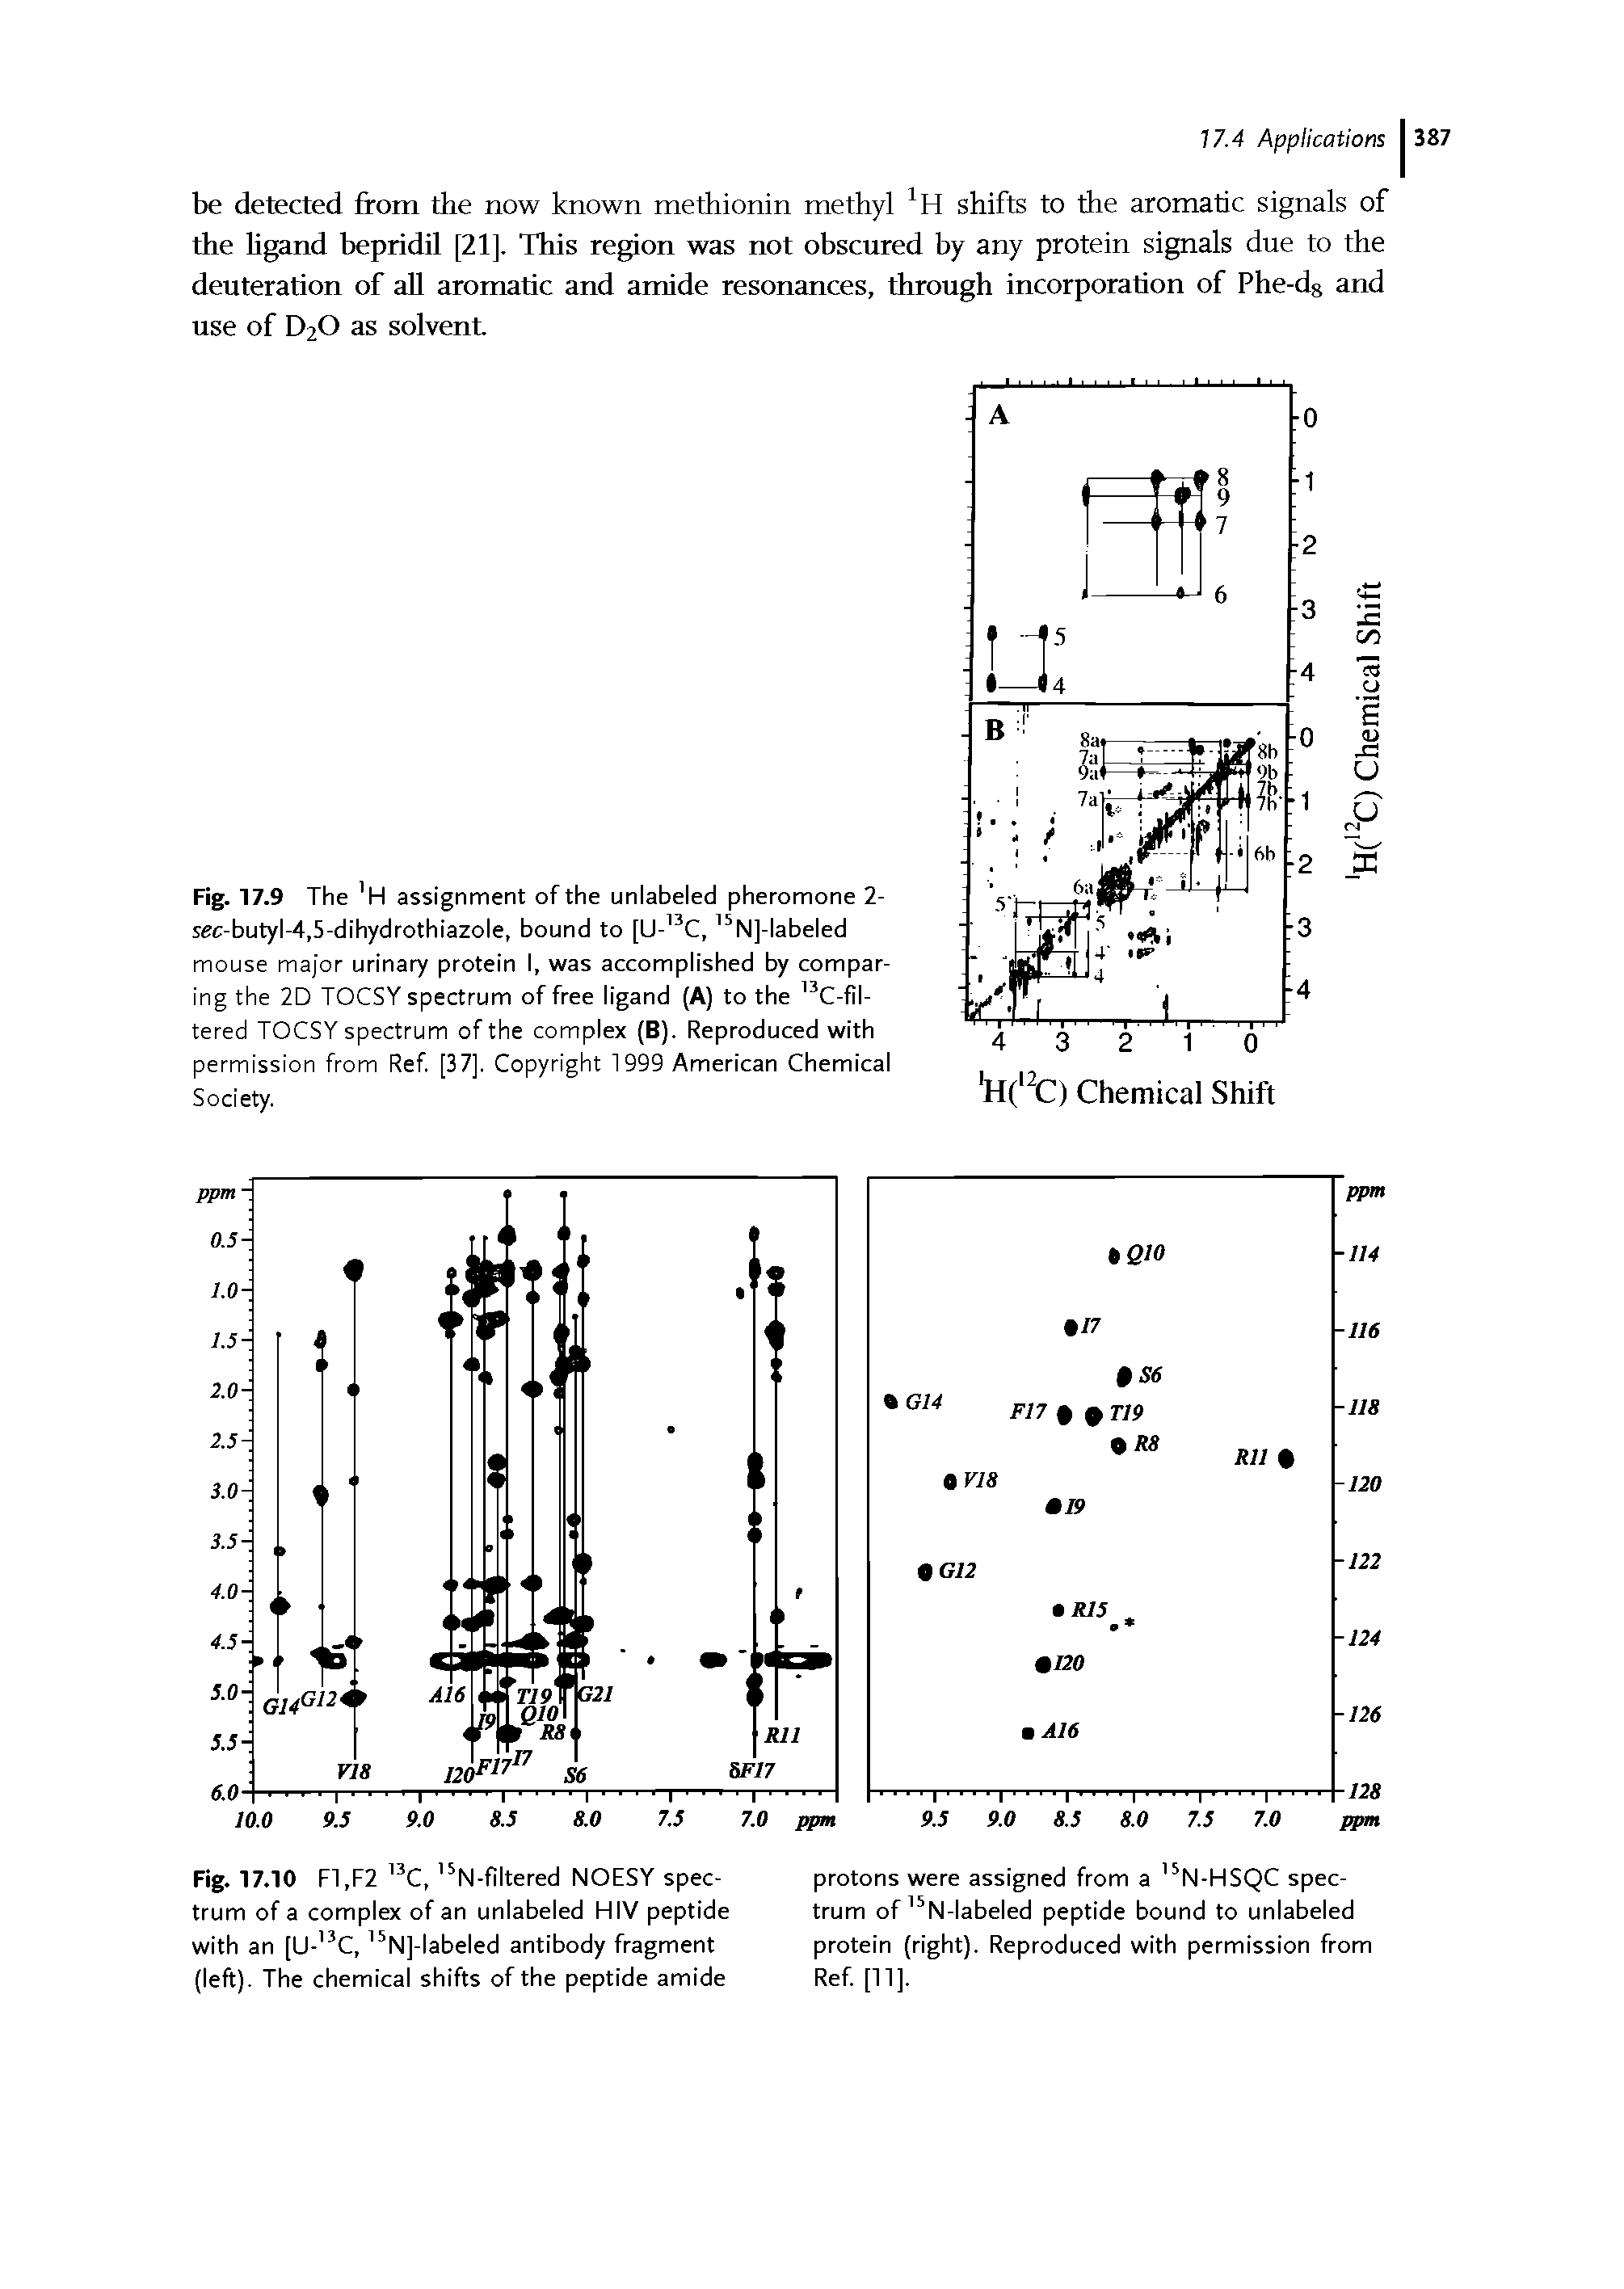 Fig. 17.9 The H assignment of the unlabeled pheromone 2-see-butyl-4,5-dihydrothiazole, bound to [U-13C, 15N]-labeled mouse major urinary protein I, was accomplished by comparing the 2D TOCSY spectrum of free ligand (A) to the 13C-fil-tered TOCSY spectrum of the complex (B). Reproduced with permission from Ref. [37]. Copyright 1999 American Chemical Society.